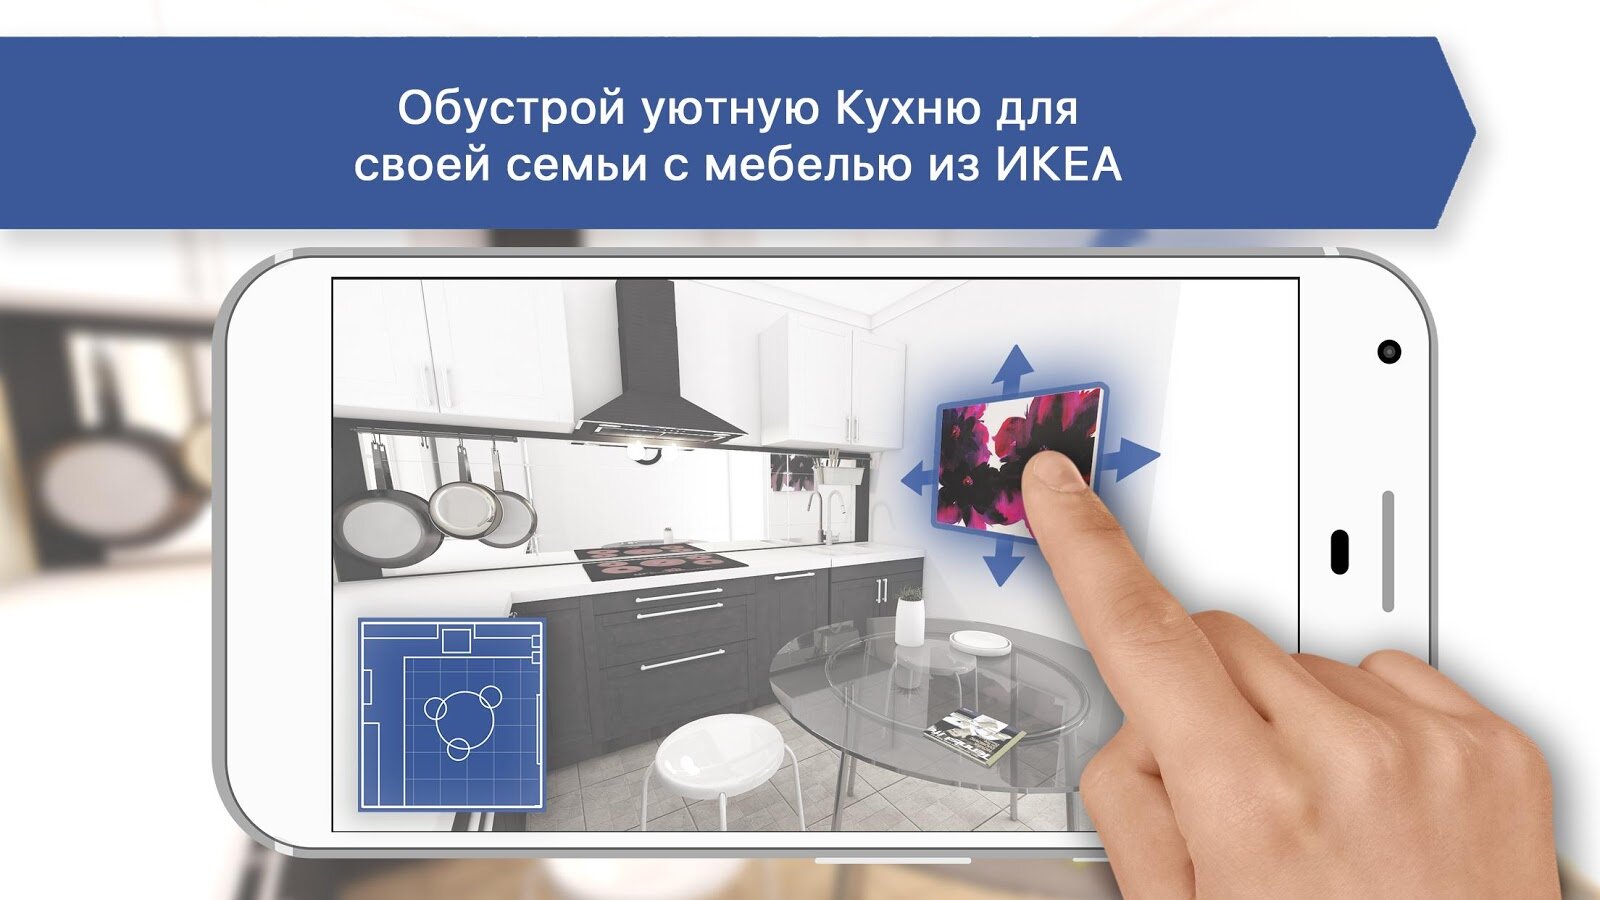 3D Kitchens – constructor and design 1097.0